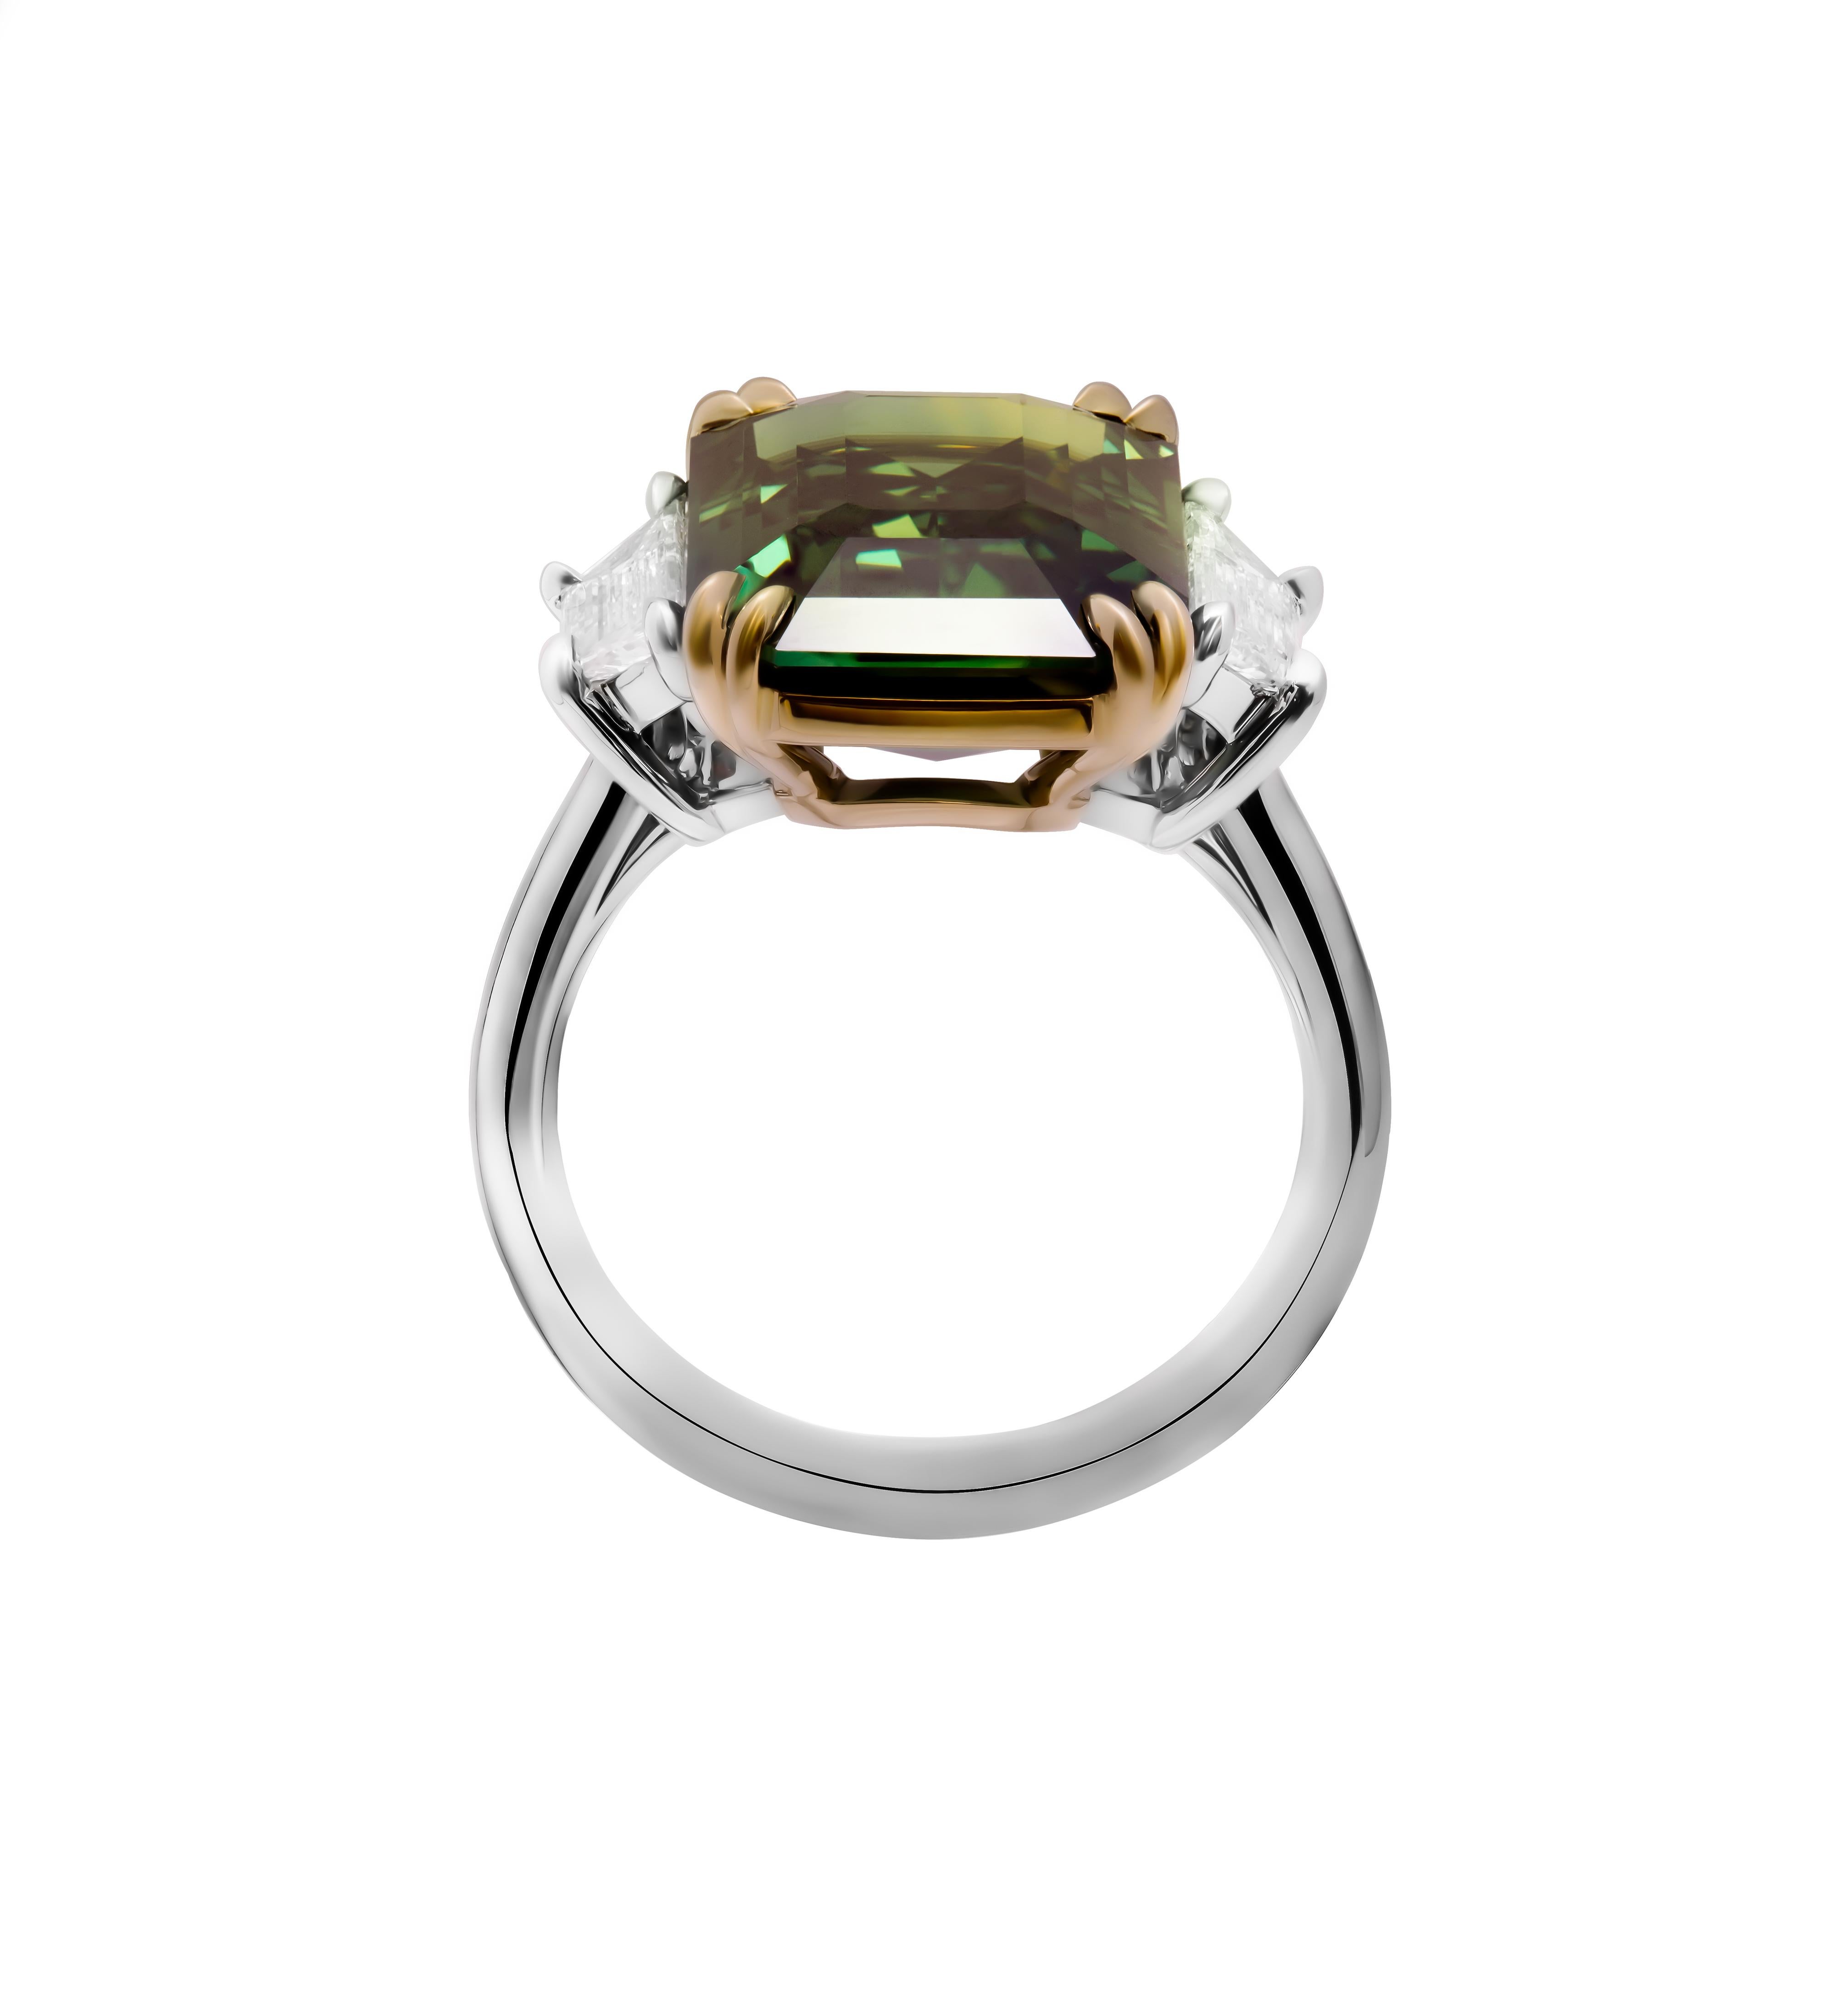 Elegance and sophistication converge in this breathtaking three-stone ring, a timeless masterpiece crafted in the luxurious combination of 18k yellow gold and 950 platinum. At its heart sits a magnificent 10.07 carat emerald-cut green sapphire,